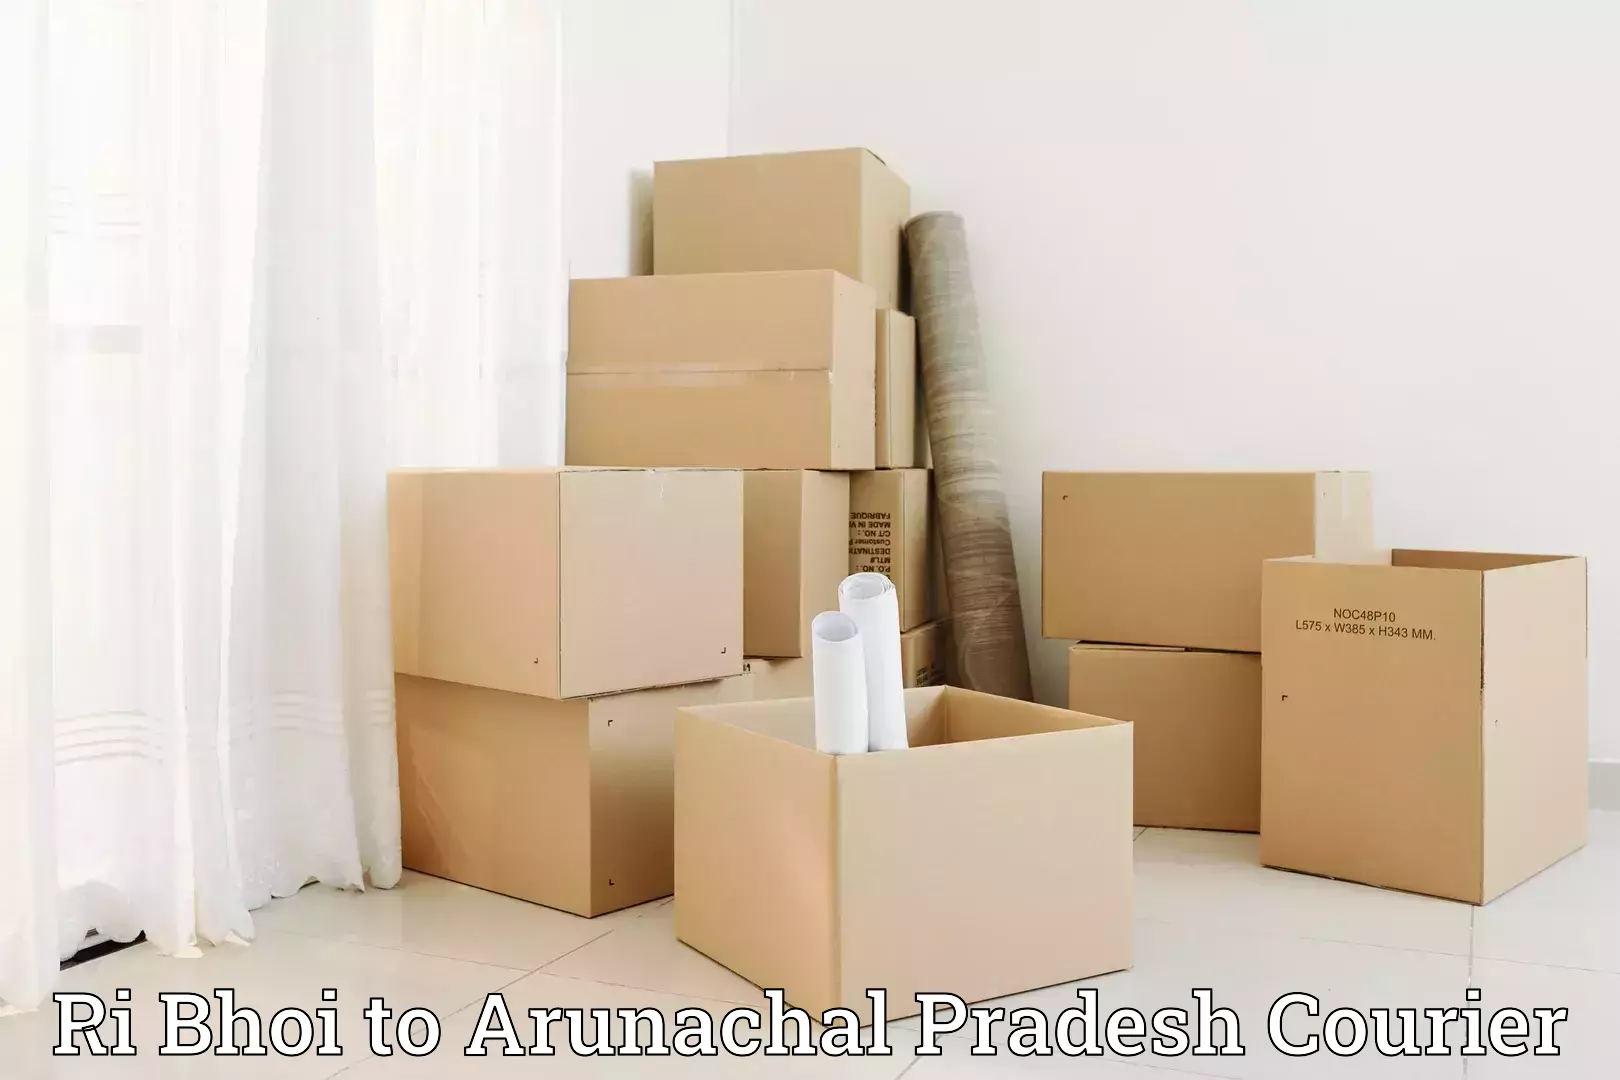 Professional movers and packers Ri Bhoi to Khonsa